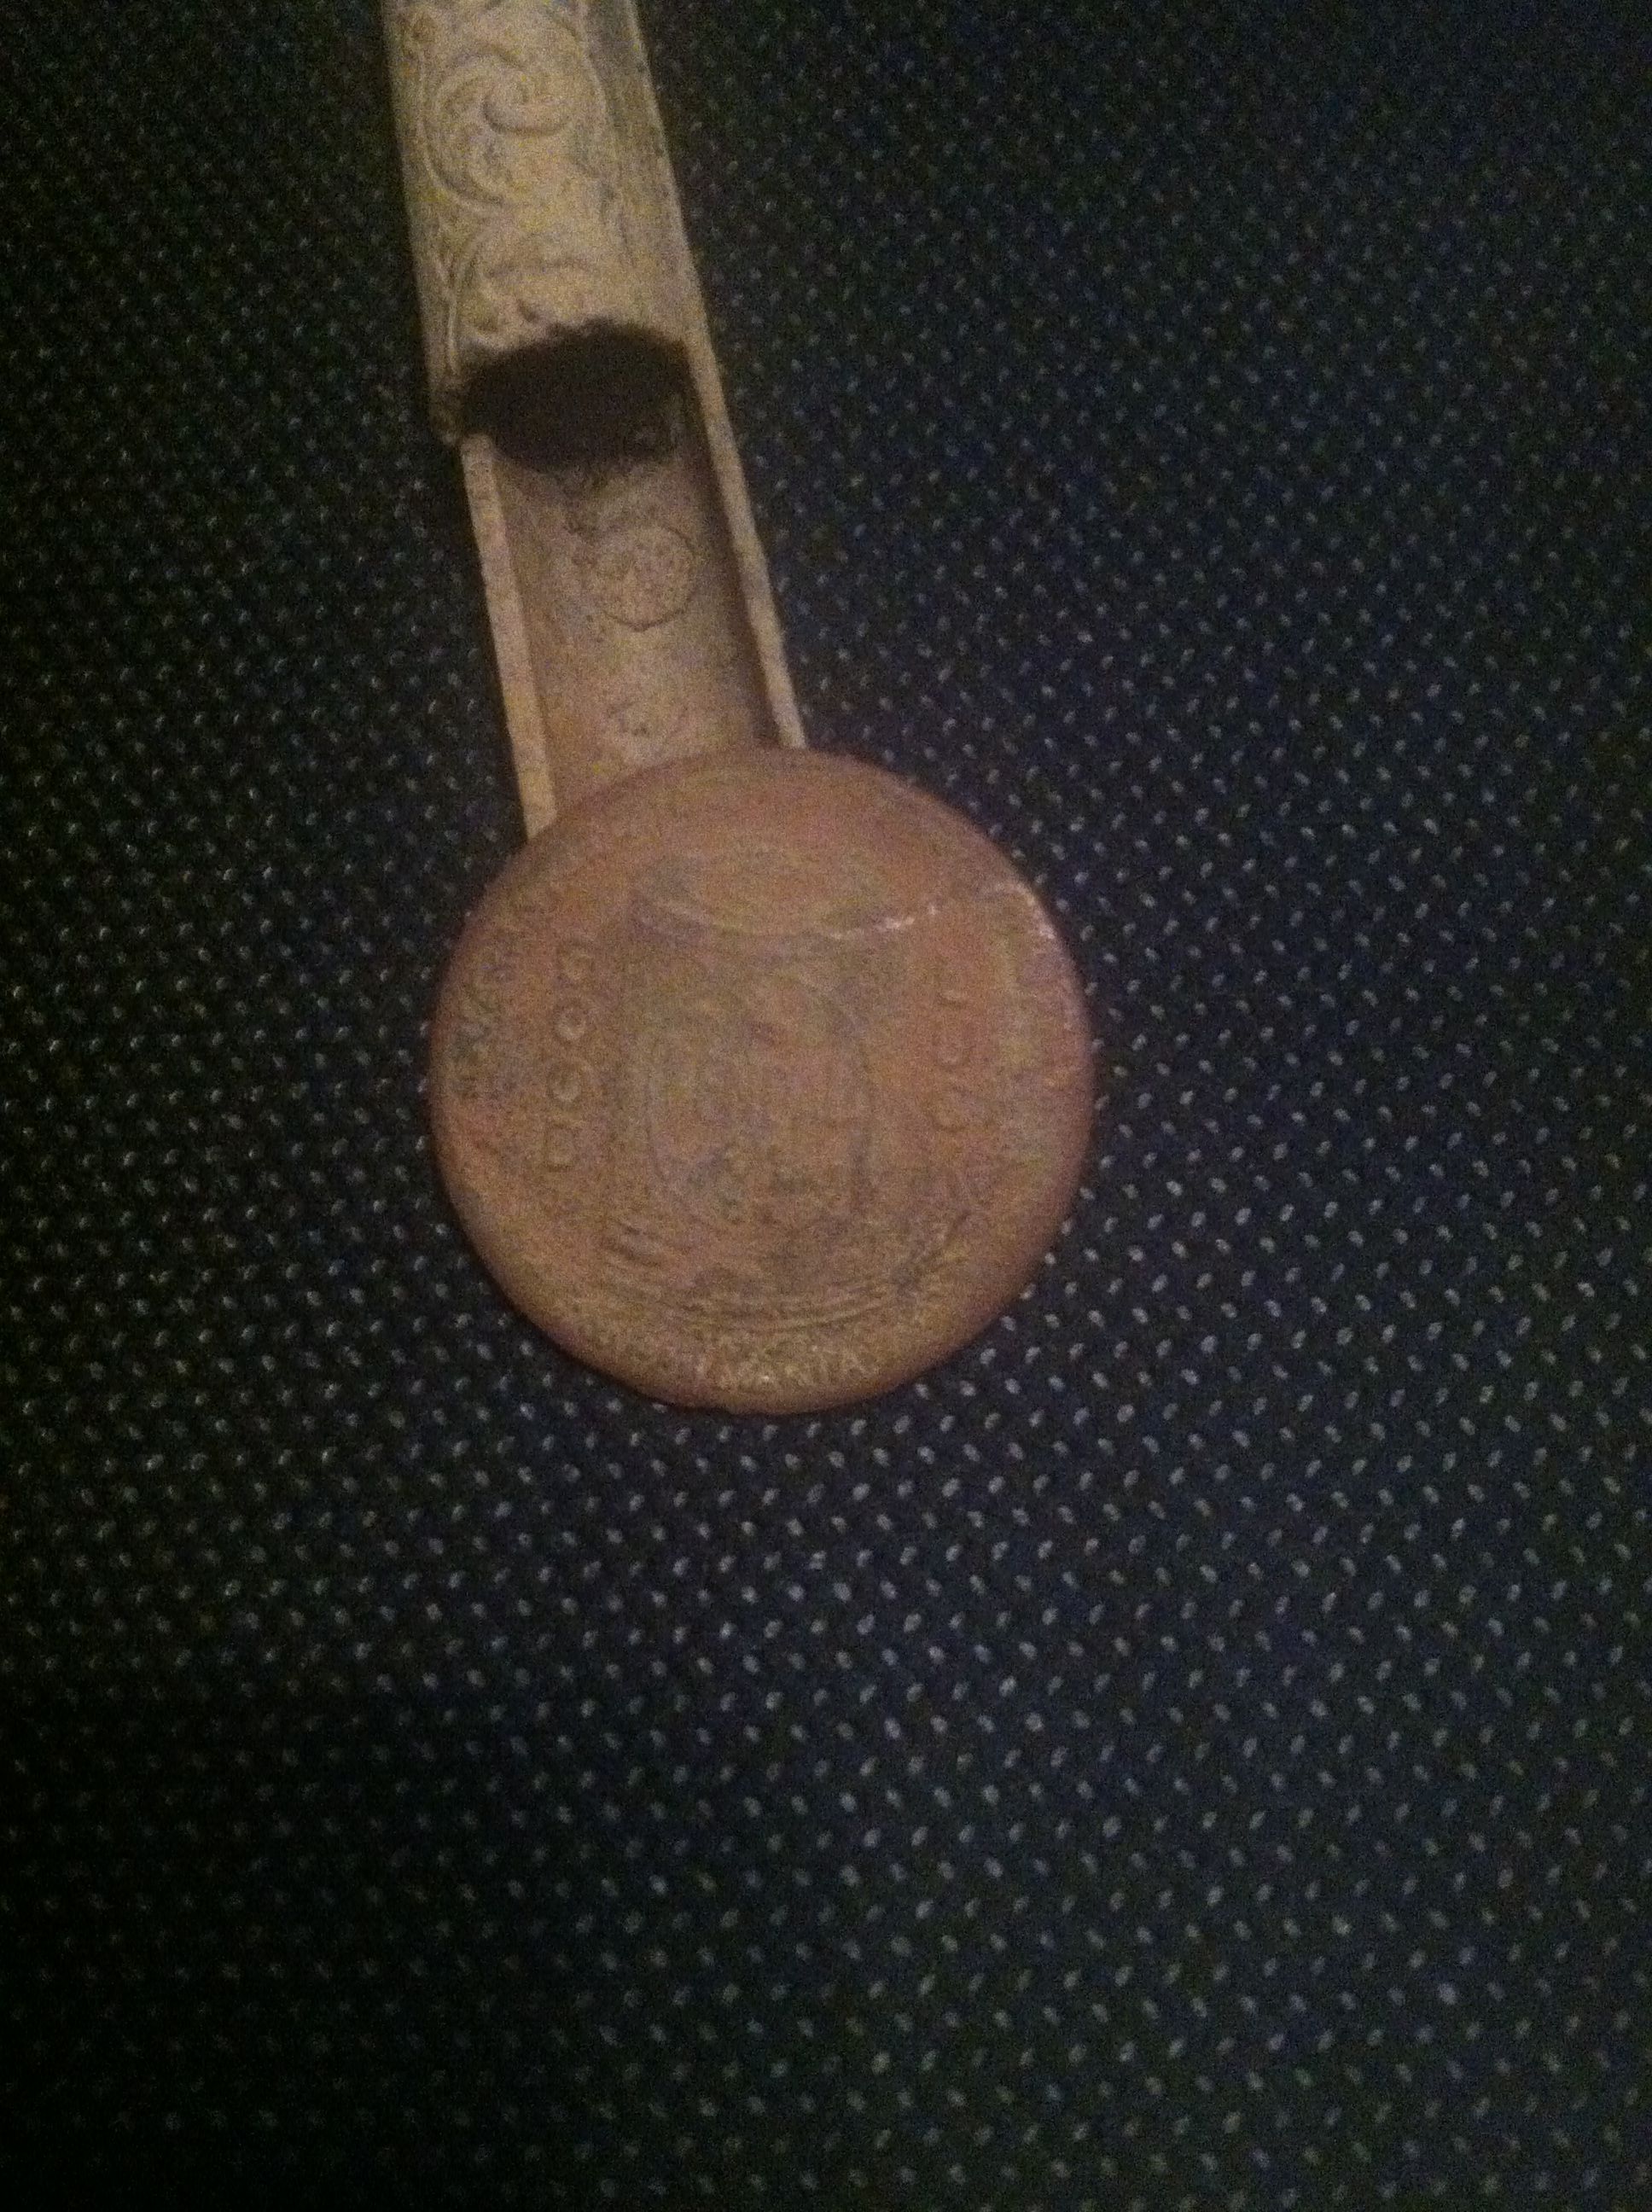 Kendall motor oil token. As far as I can tell its from about 1910, I'll update that if I find a different date. It says Good Luck on one side, and a m